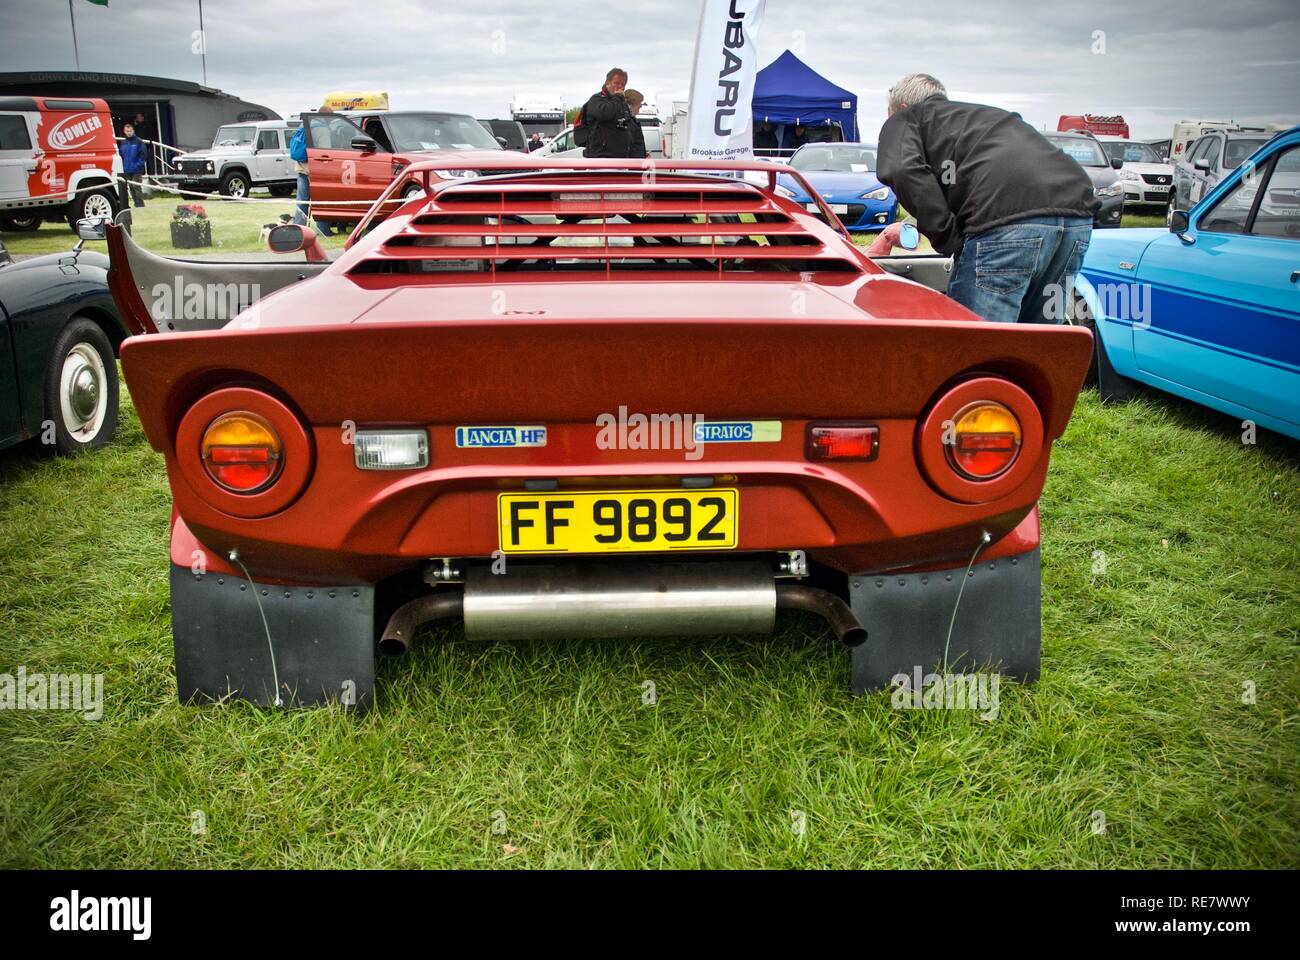 A CAE Corse, Lancia Stratos replica sports car at the Anglesey Vintage Rally, Anglesey, North Wales, UK, May 2015 Stock Photo